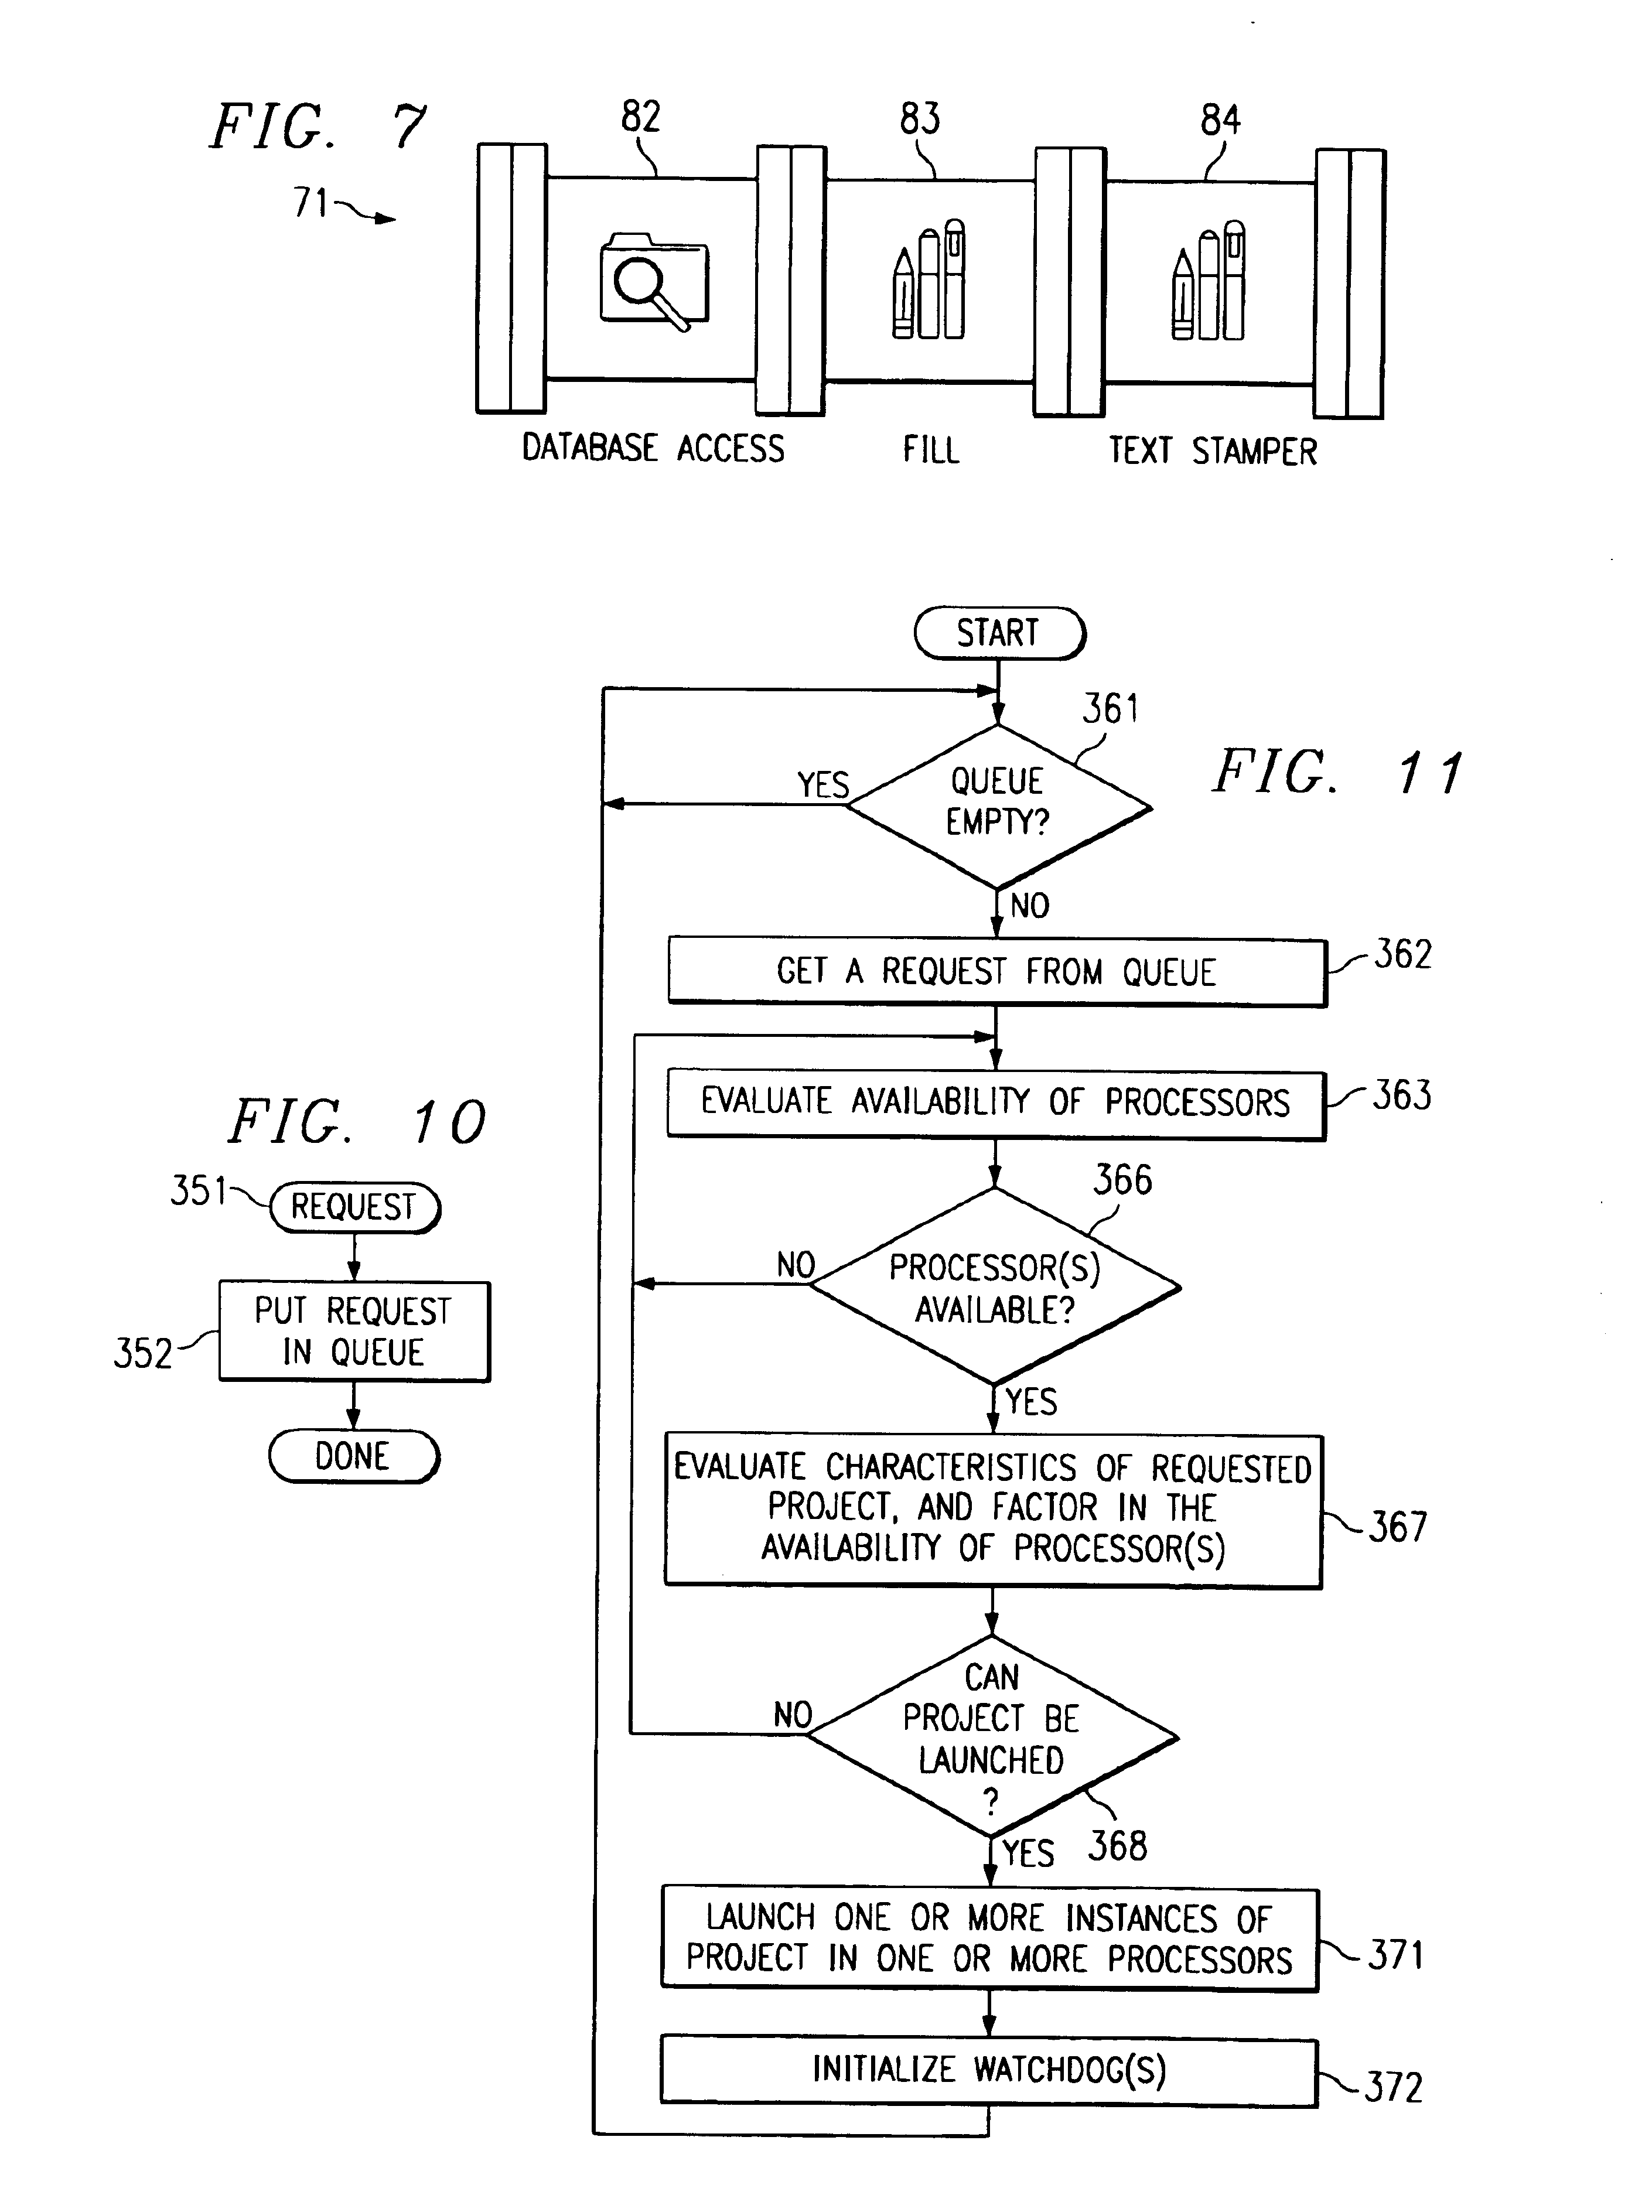 Method and apparatus for obtaining and storing data during automated data processing